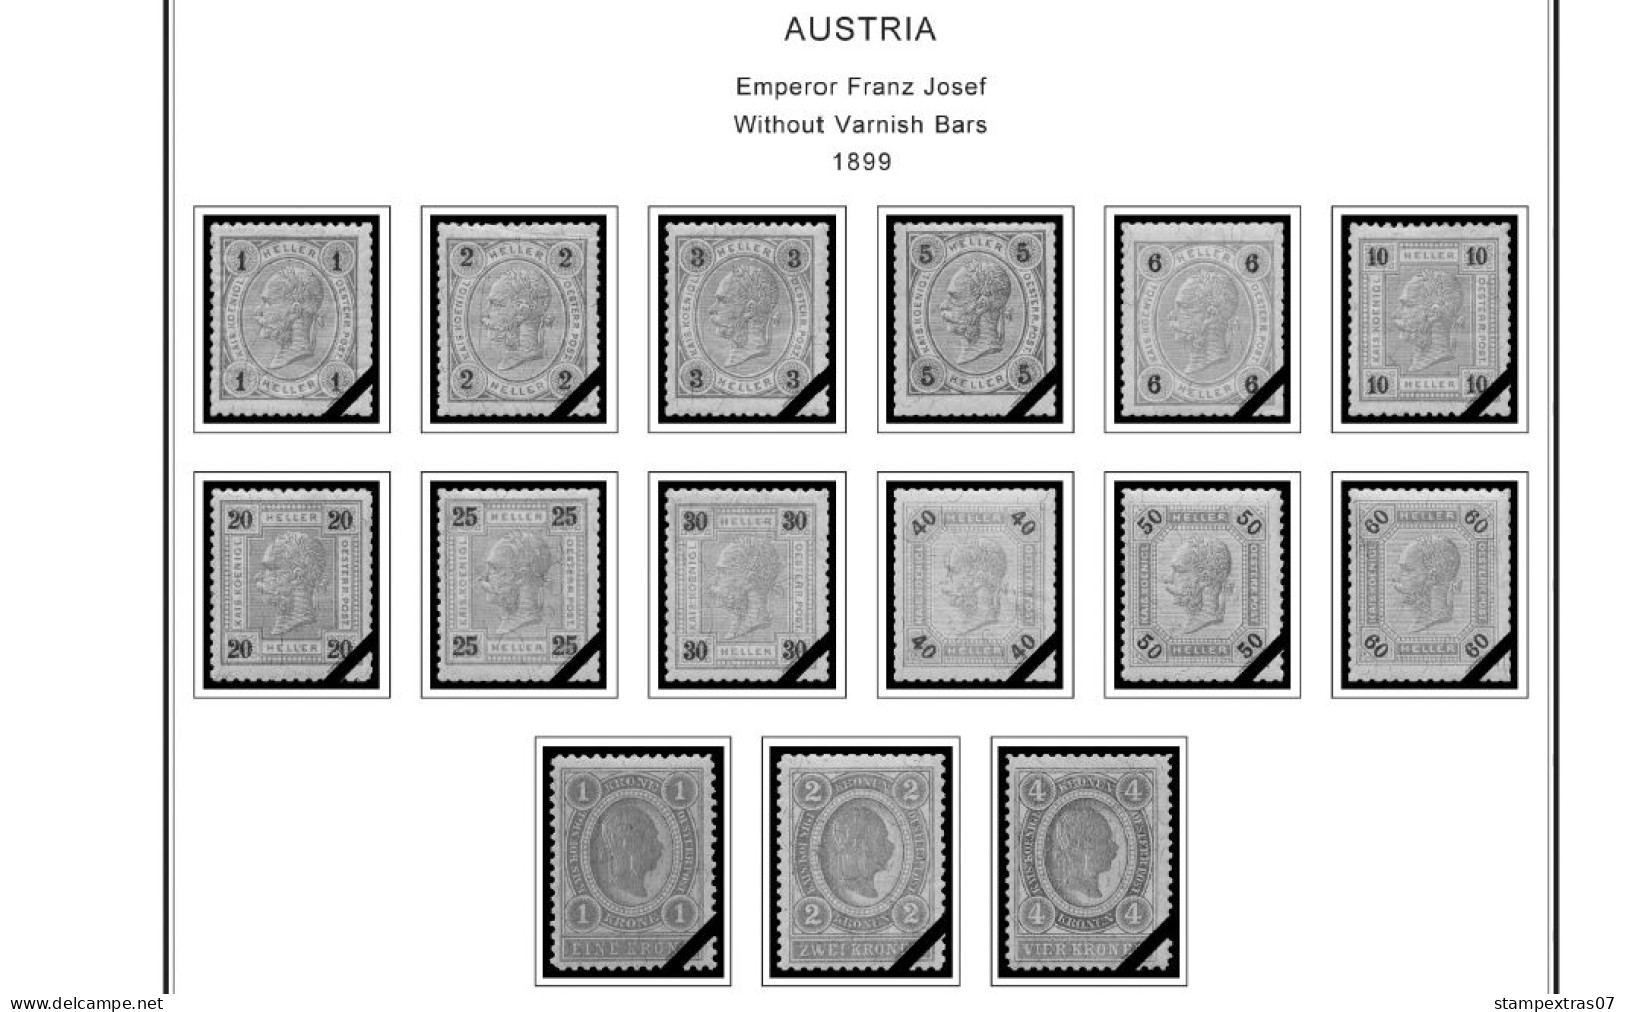 AUSTRIA 1850-2010 + 2011-2020 STAMP ALBUM PAGES (417 B&w Illustrated Pages) - Anglais